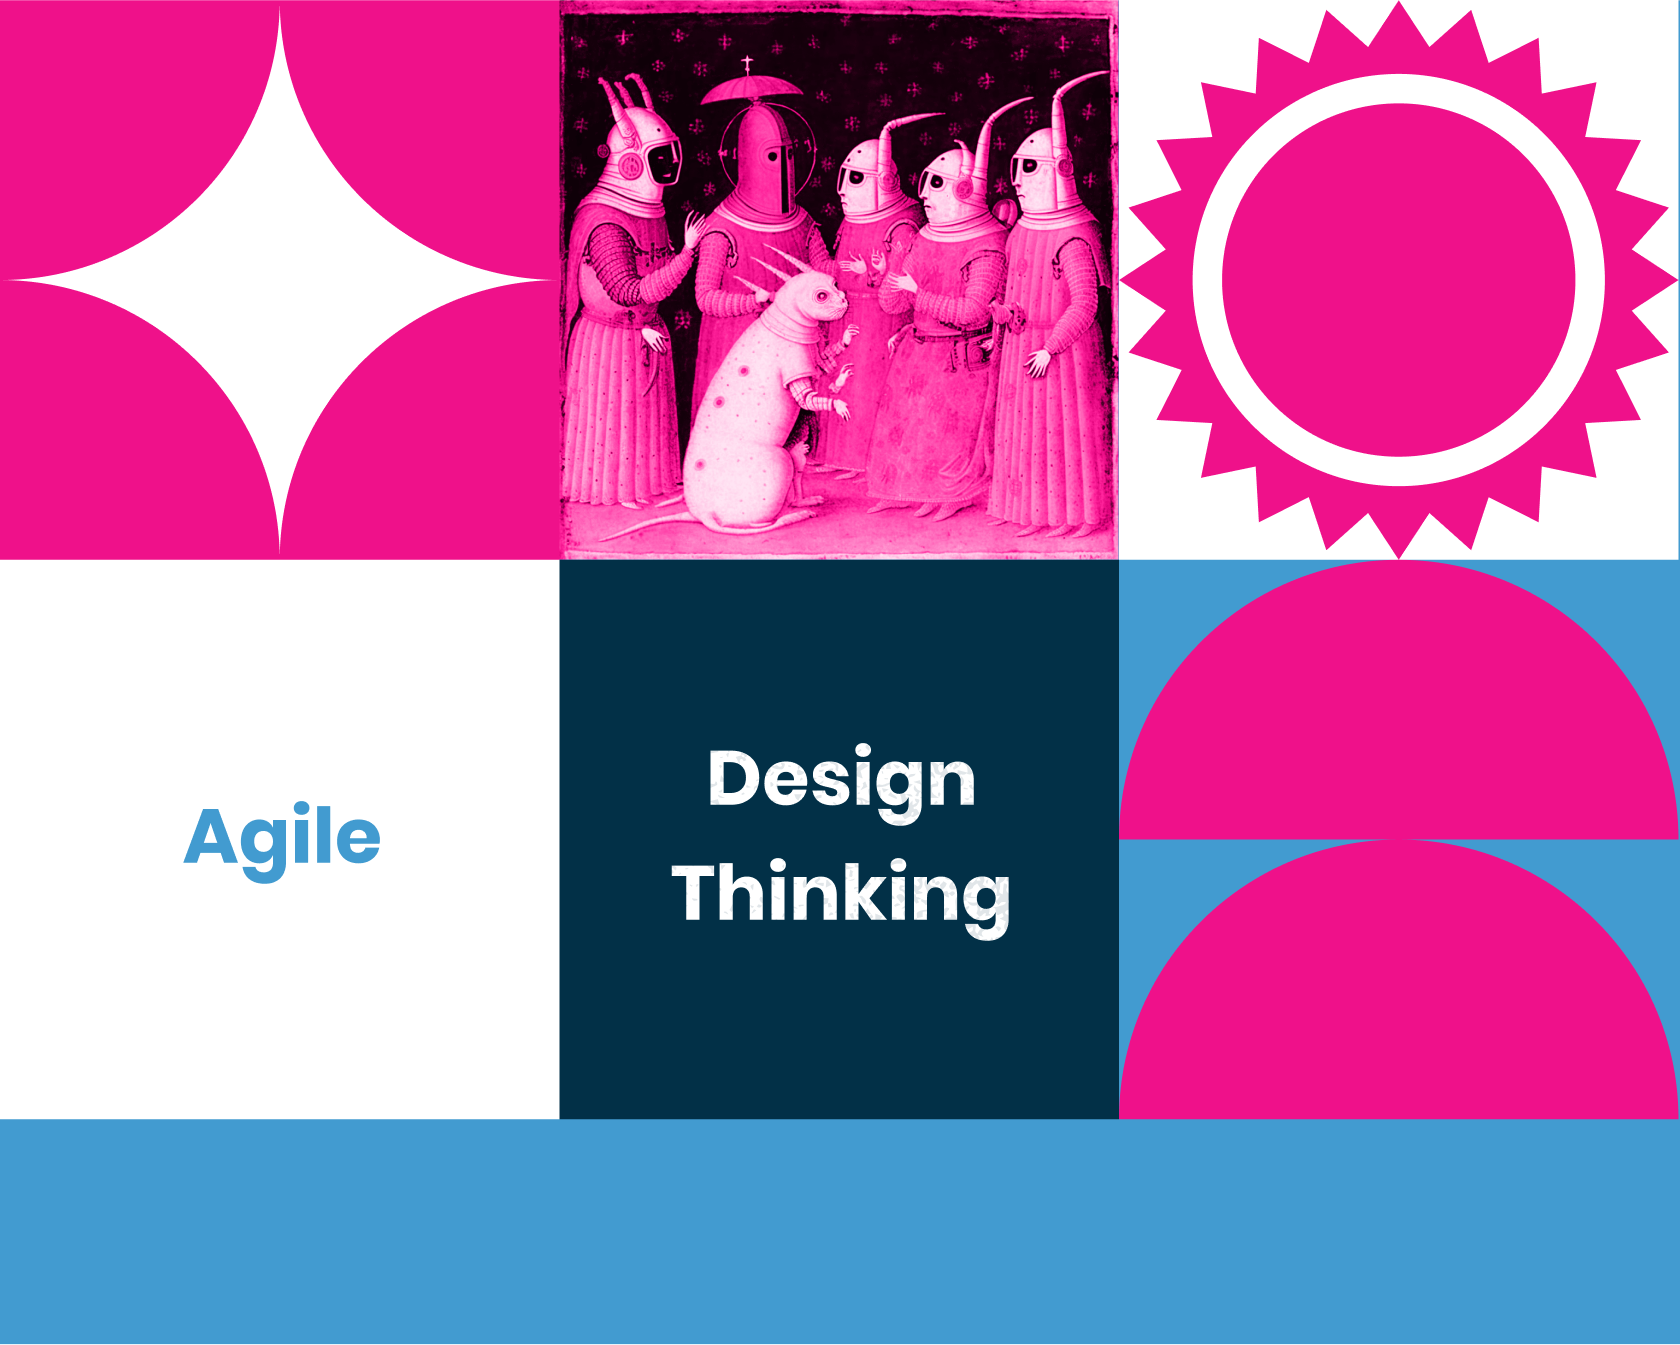 A team using design patterns and user stories to guide their agile process and create a renewed sense of purpose in their work